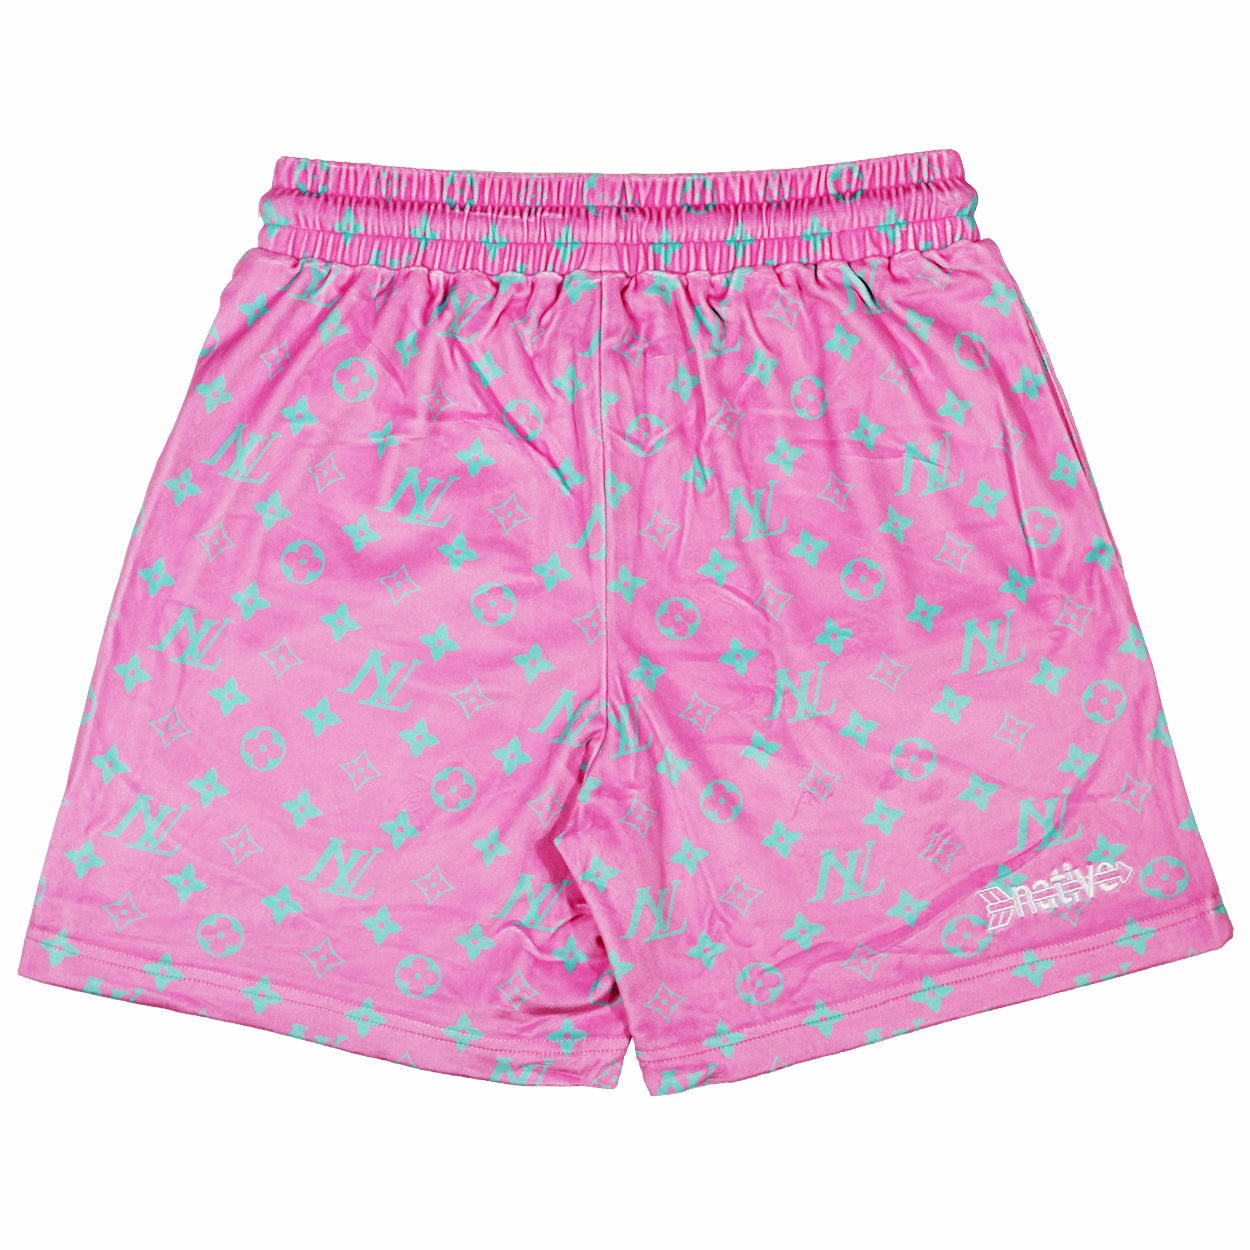 nl velour shorts in south beach (pink)